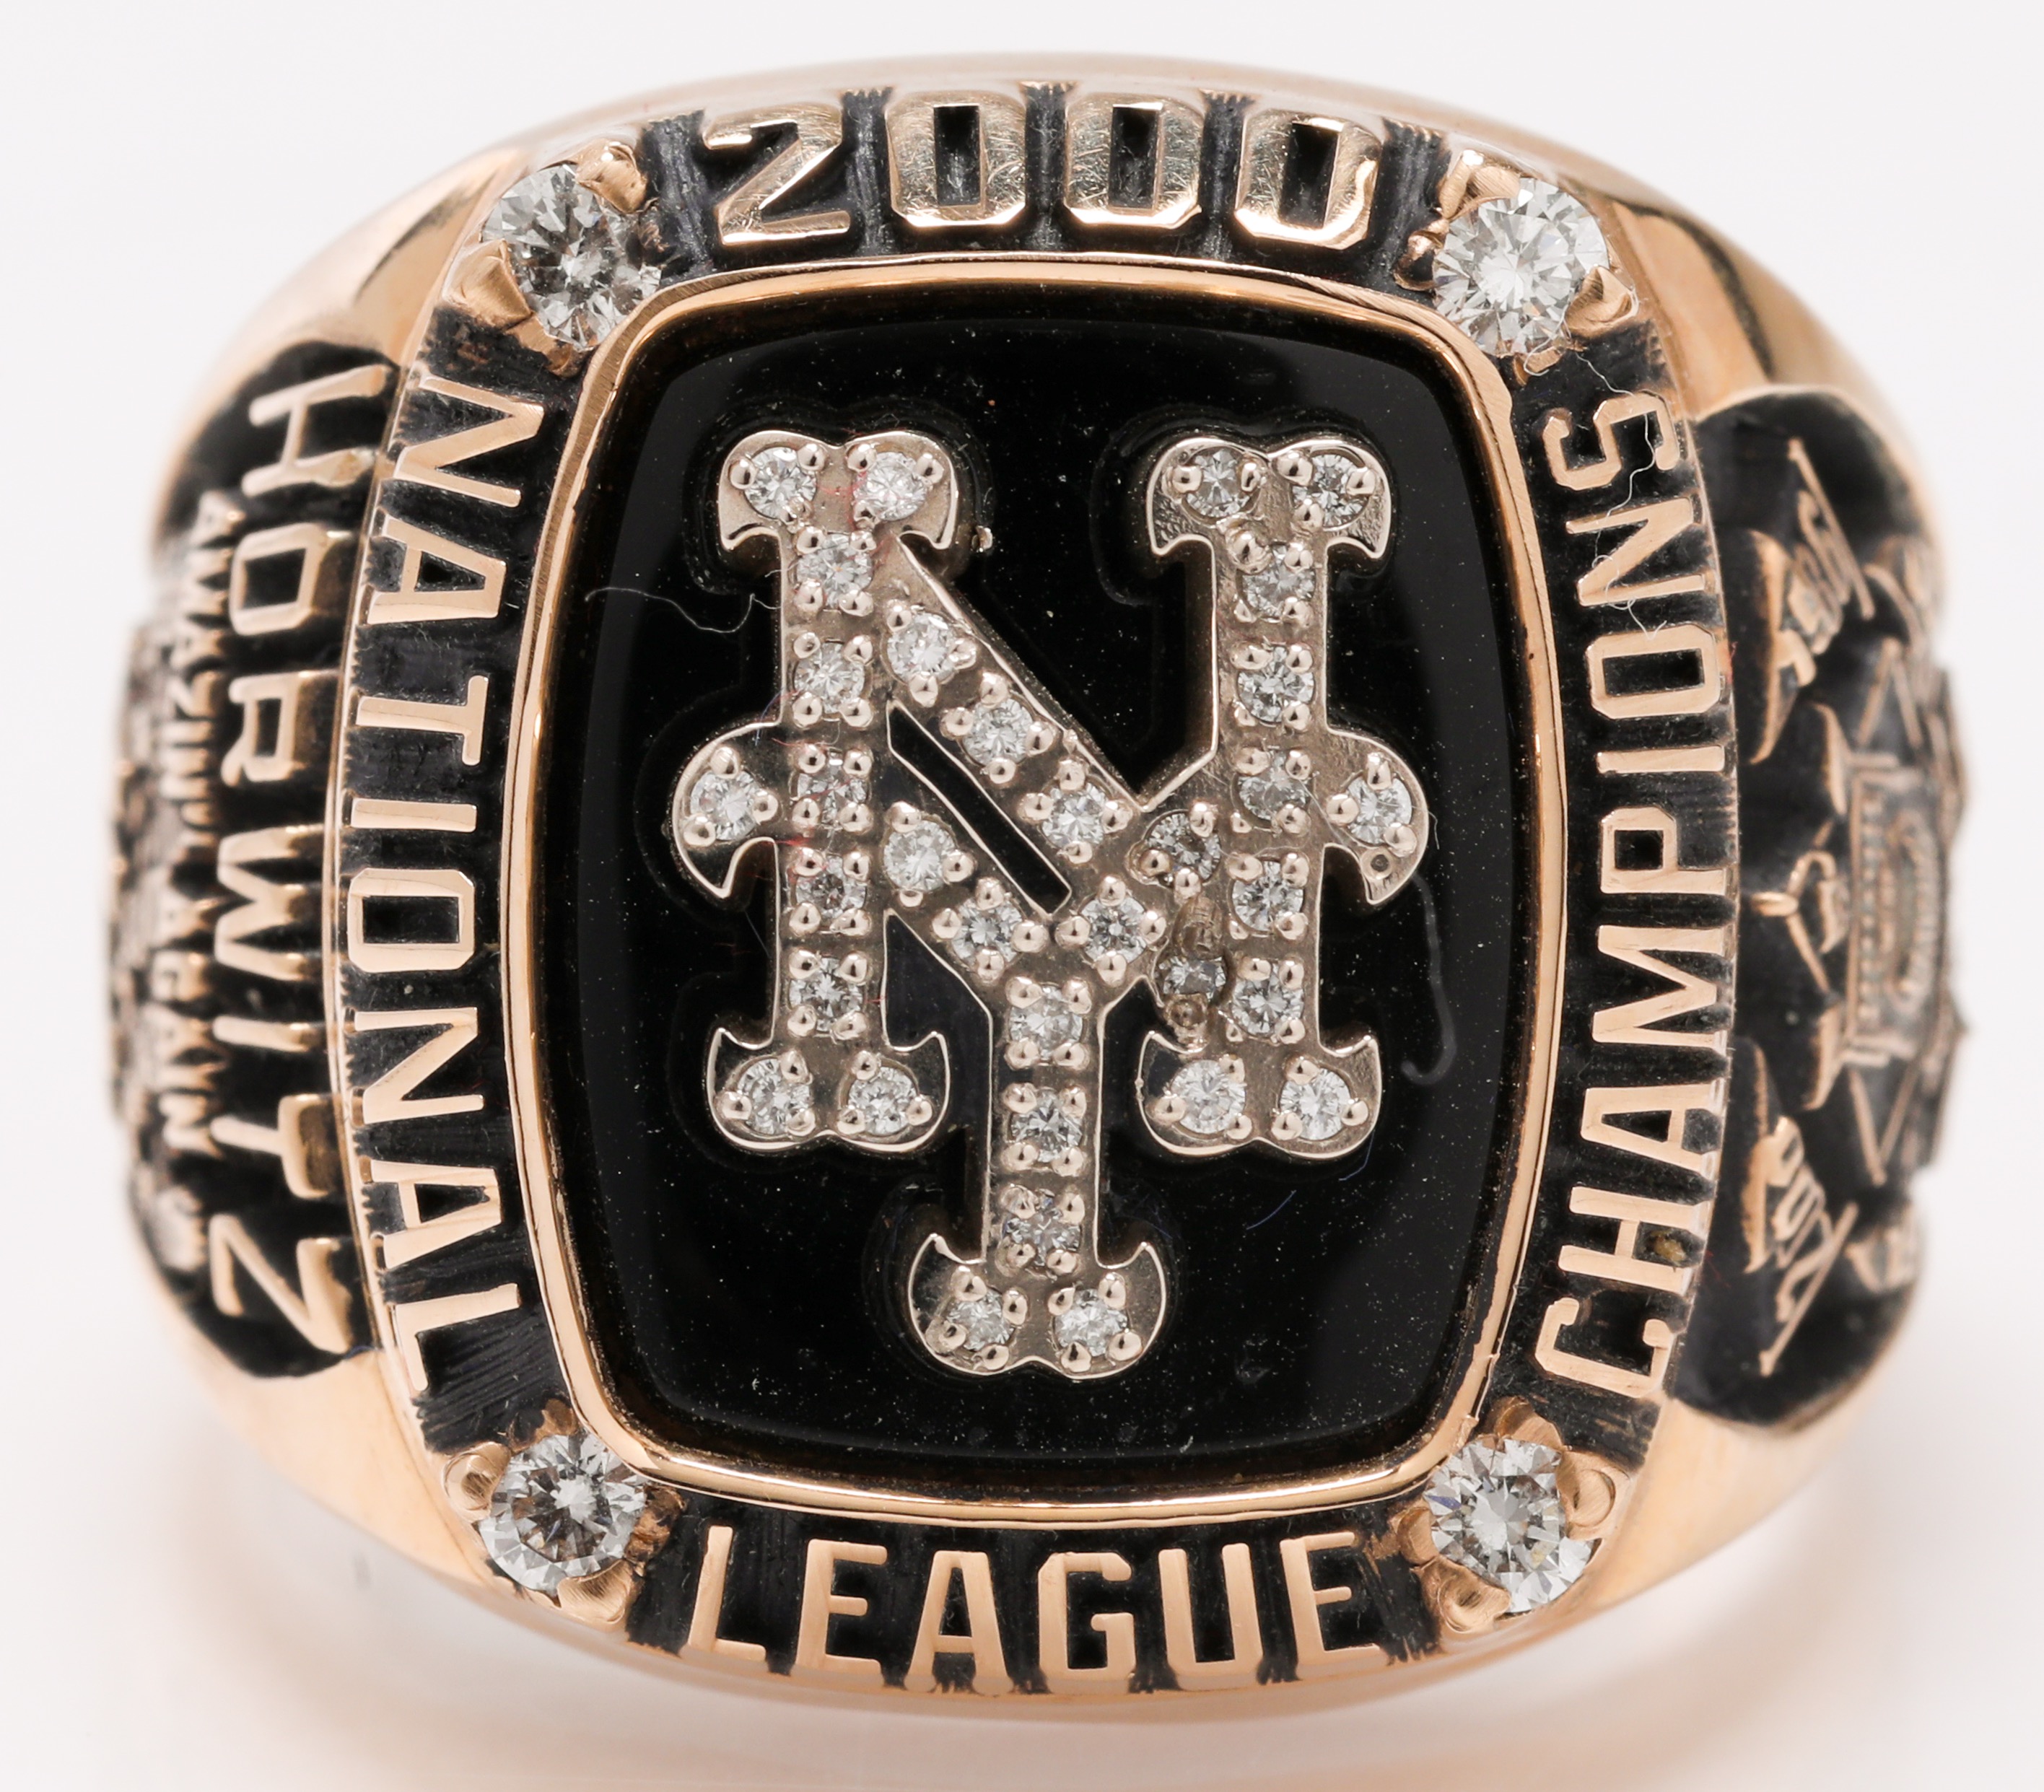 New York Mets 2000 NLCS Championship Ring - Top View